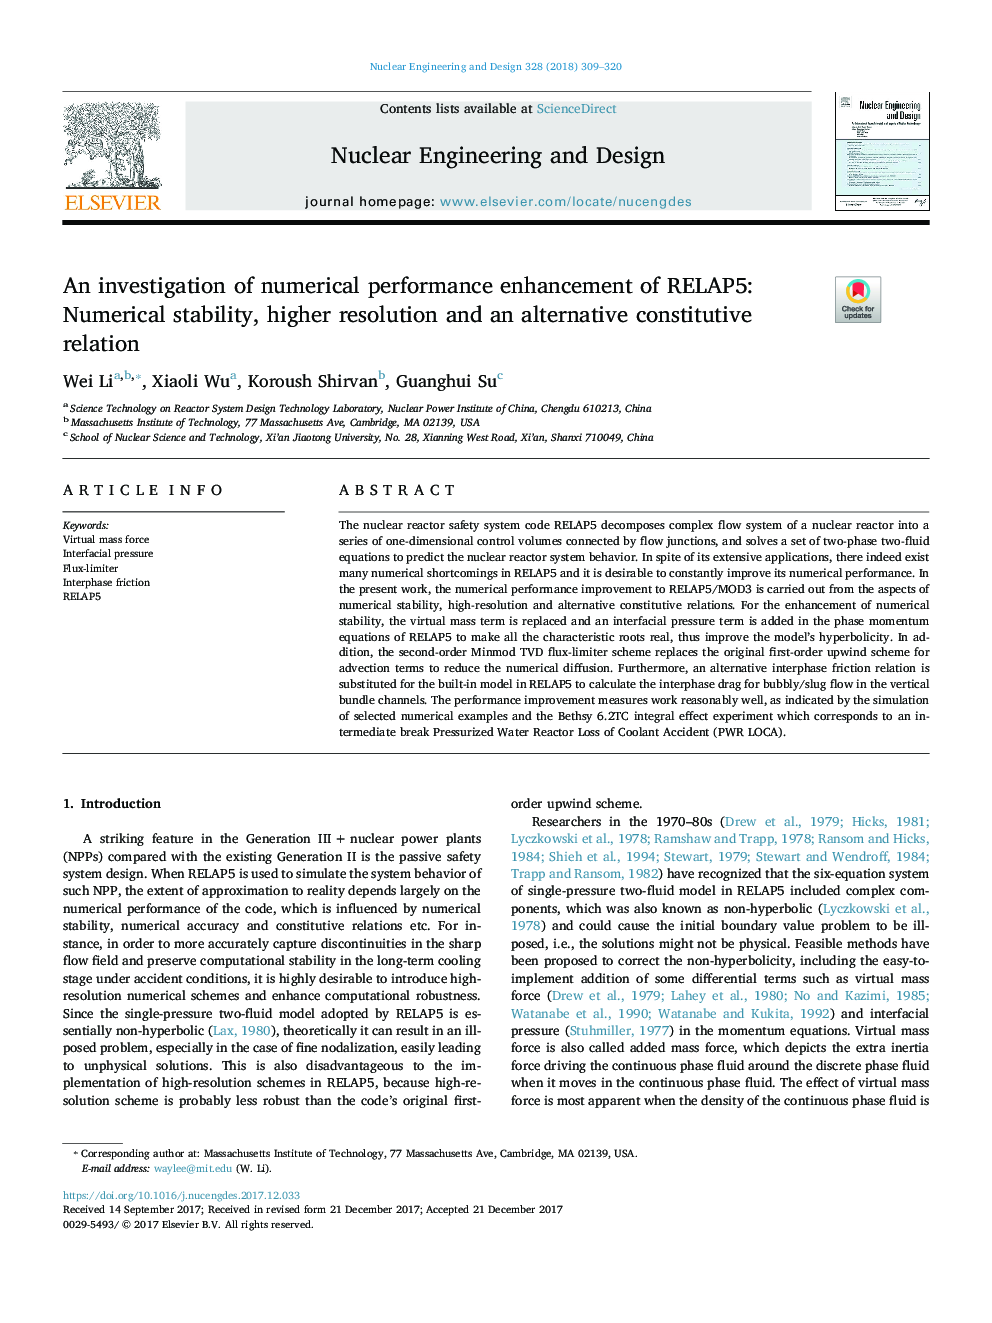 An investigation of numerical performance enhancement of RELAP5: Numerical stability, higher resolution and an alternative constitutive relation